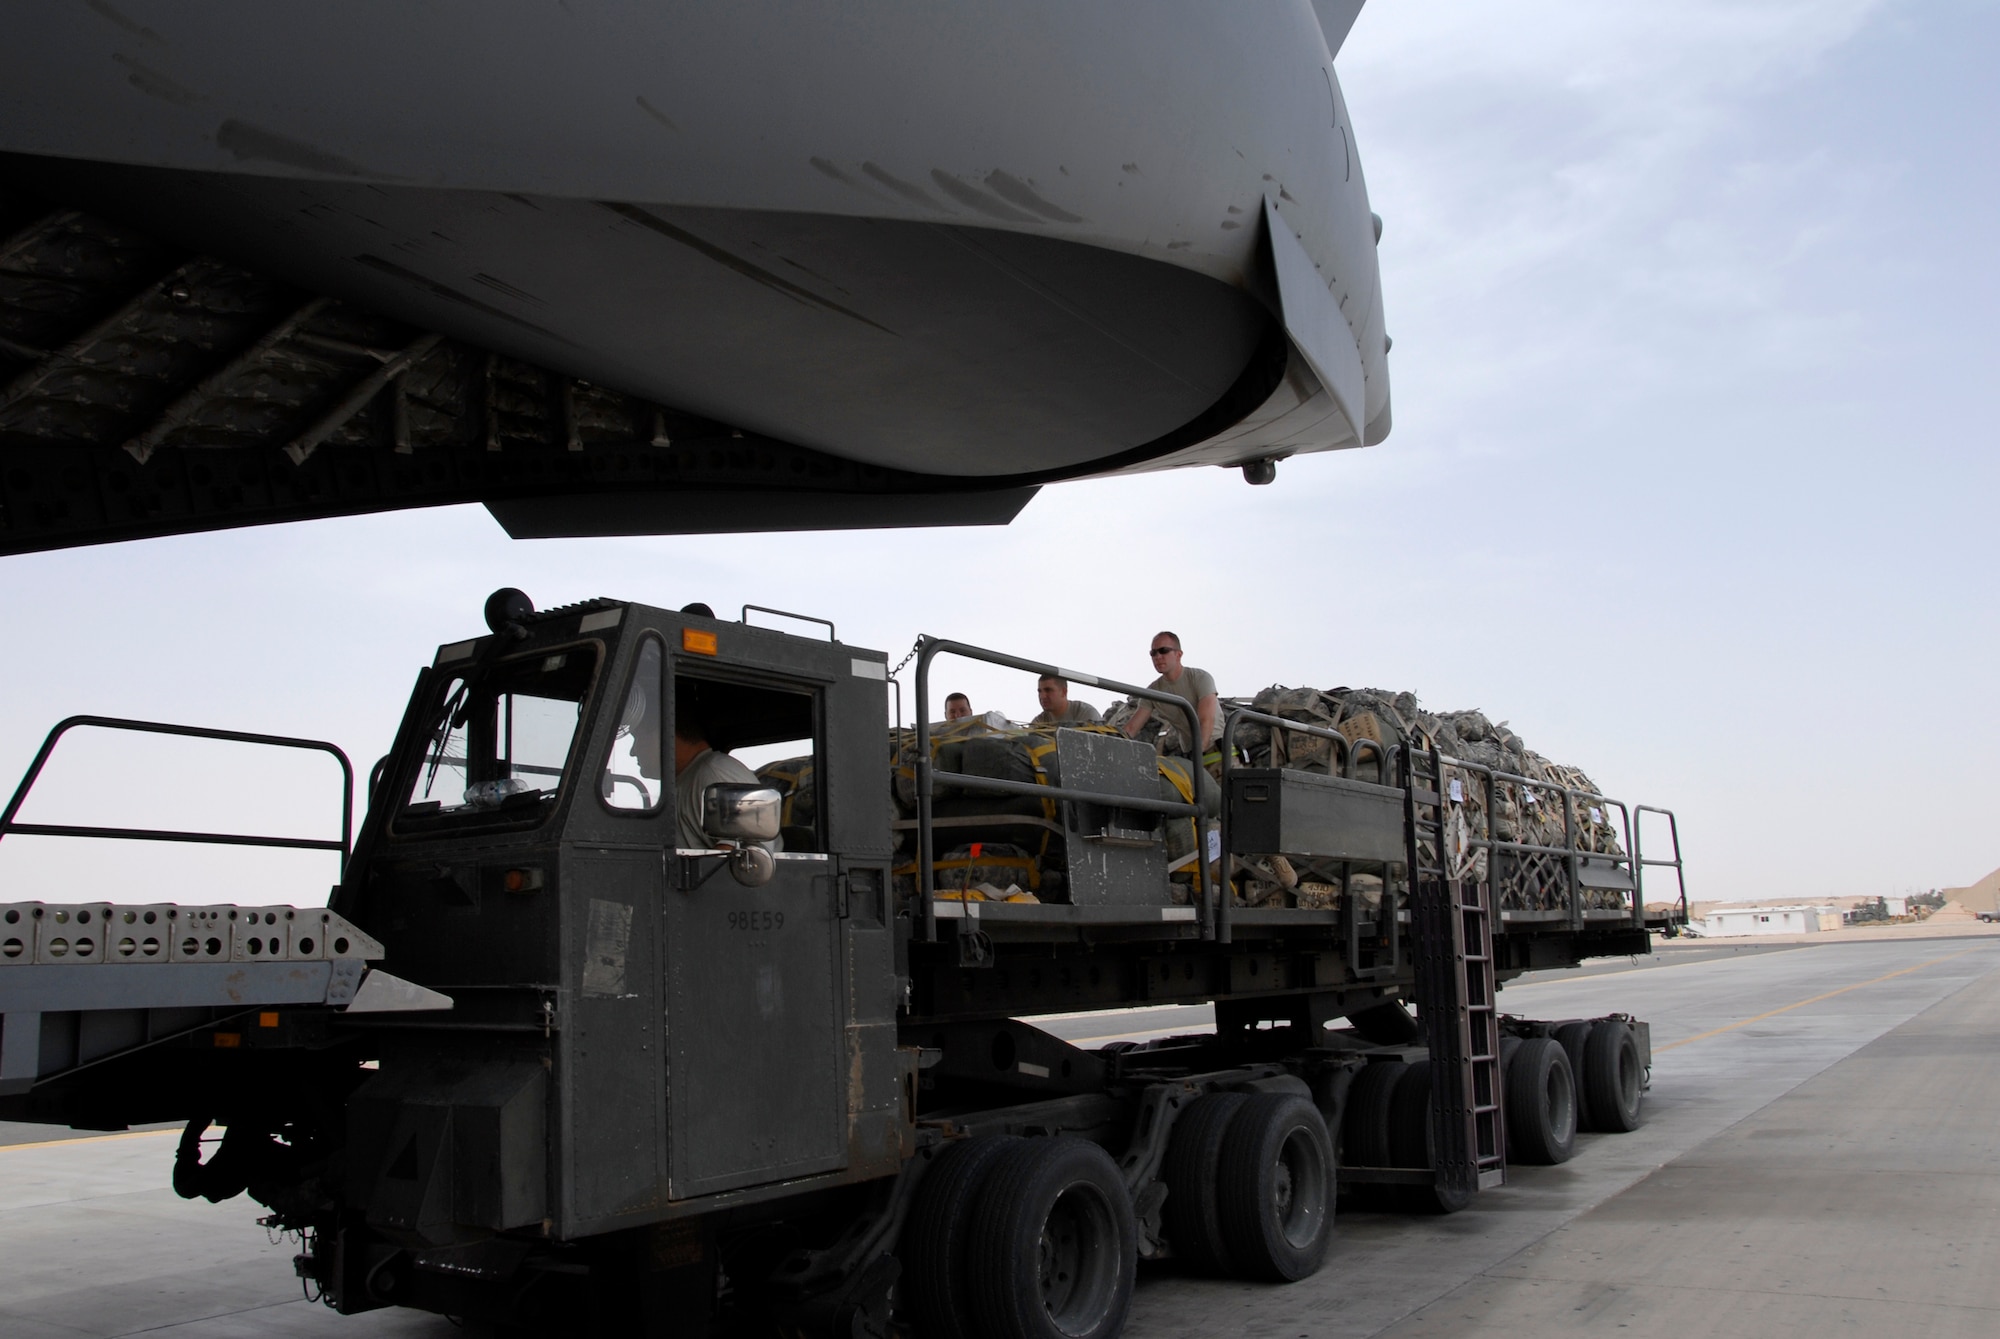 SOUTHWEST ASIA -- Airmen from the 386th Expeditionary Logistics Readiness Squadron's aerial port flight help push a pallet off of a 60K aircraft cargo loader and onto a U.S. Air Force C-17 Globemaster III May 15, 2008, at an air base in the Persian Gulf Region. The aerial port flight handles all loading and unloading of military and coalition partners' aircraft departing and arriving the base and is responsible for processing all originating, through load, and terminating cargo. This flight is U.S. Central Command's largest passenger operation, handling more than 65,000 passengers a month in support of Operations Enduring and Iraqi Freedom. (U.S. Air Force photo/ Staff Sgt. Patrick Dixon)